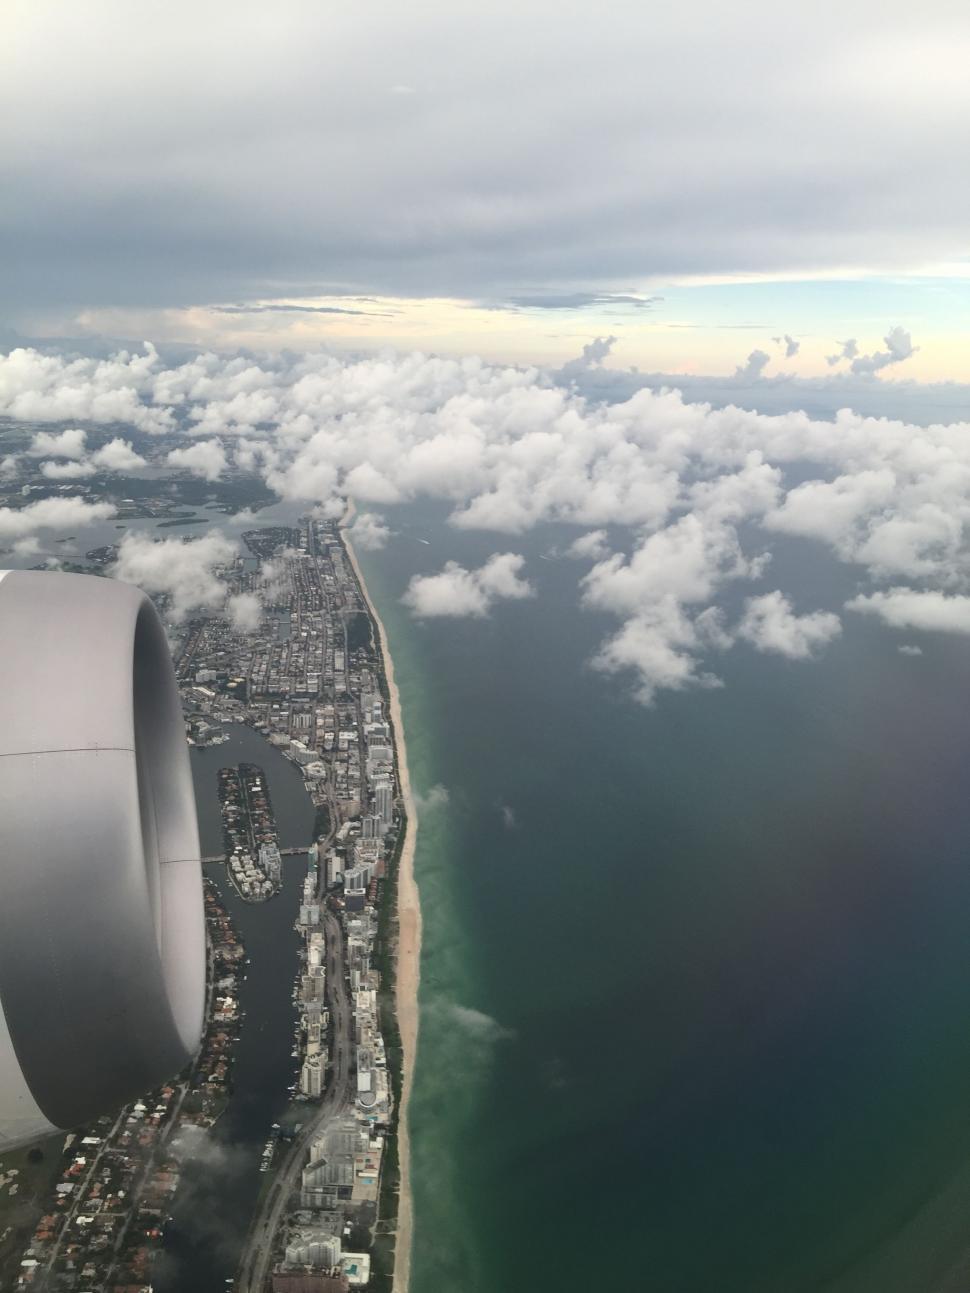 Free Image of Aerial View of Airplane Wing Flying Over City 